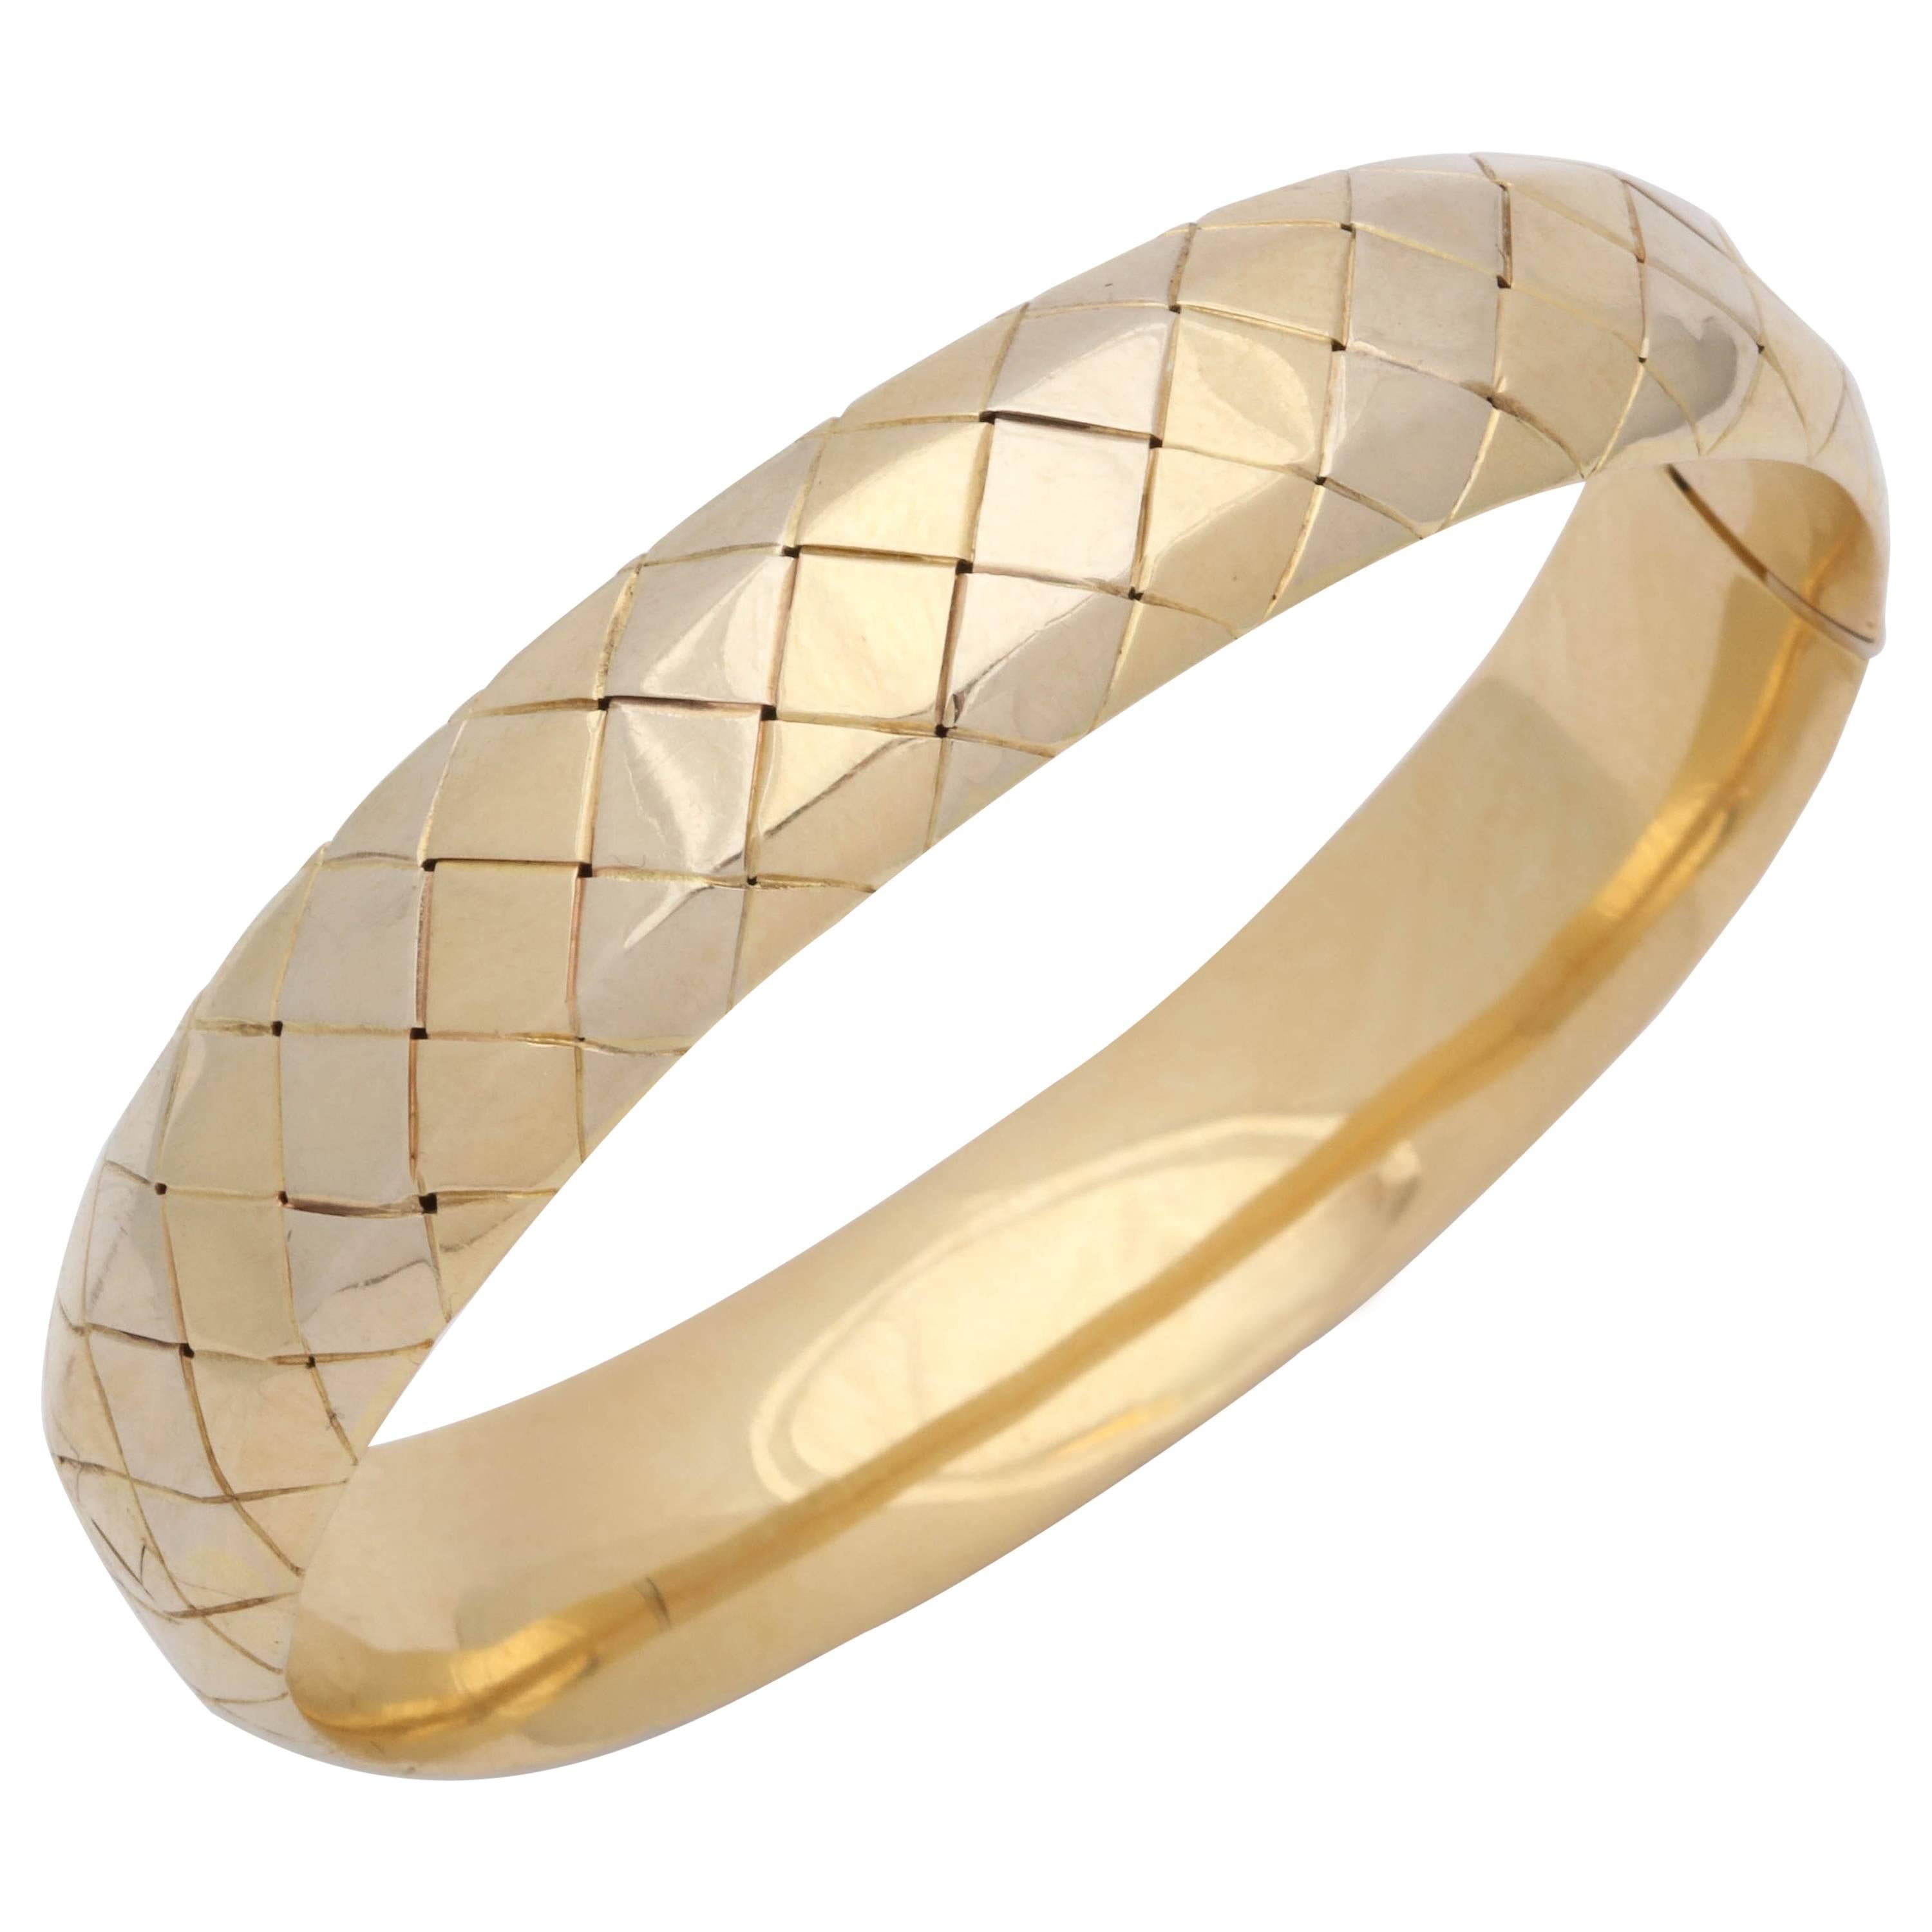 Tiffany & Co. Quilt Pattern Design Gold Bangle Bracelet with Invisible Lock